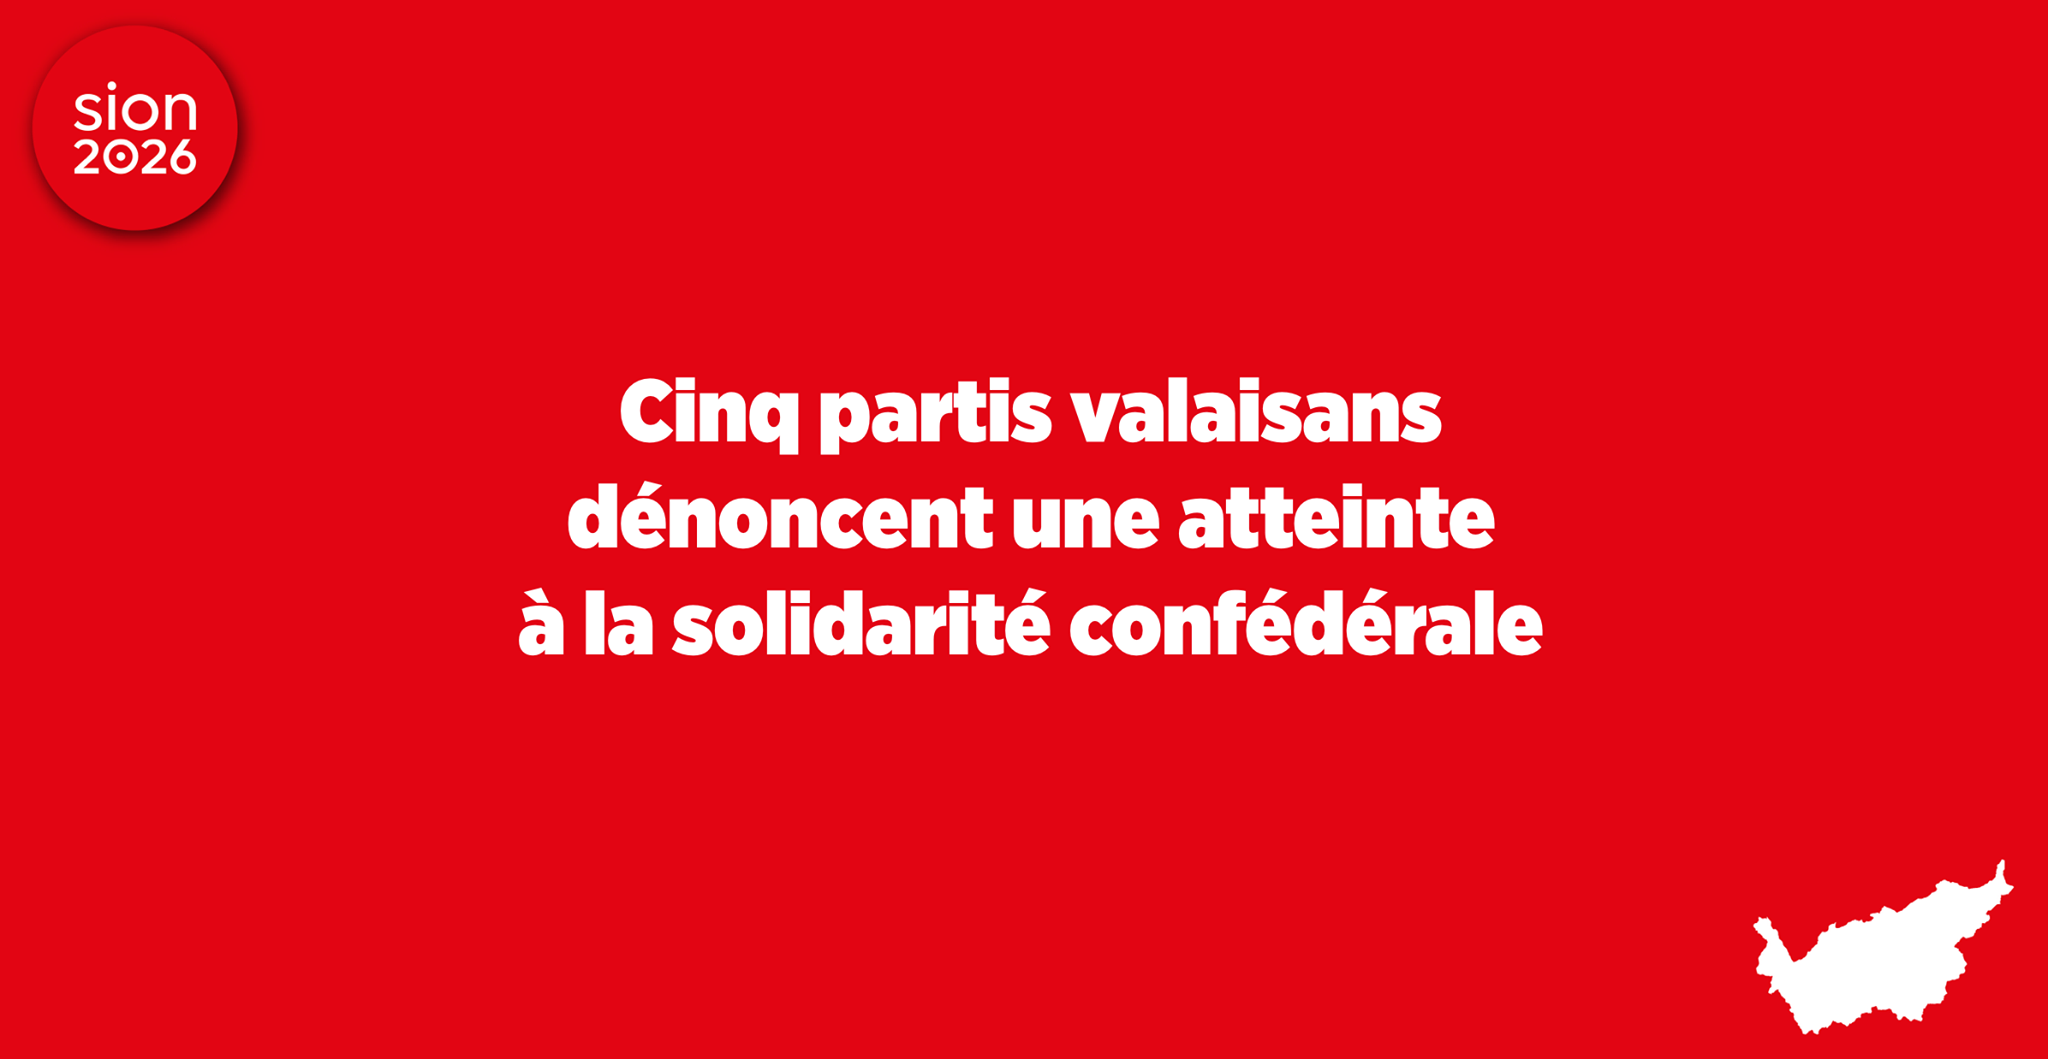 A joint statement from five Valais political parties claimed the motion to extend a referendum nationwide on Sion's bid for the 2026 Olympic and Paralympic Games was an attack on Confederal solidarity ©Sion 2026